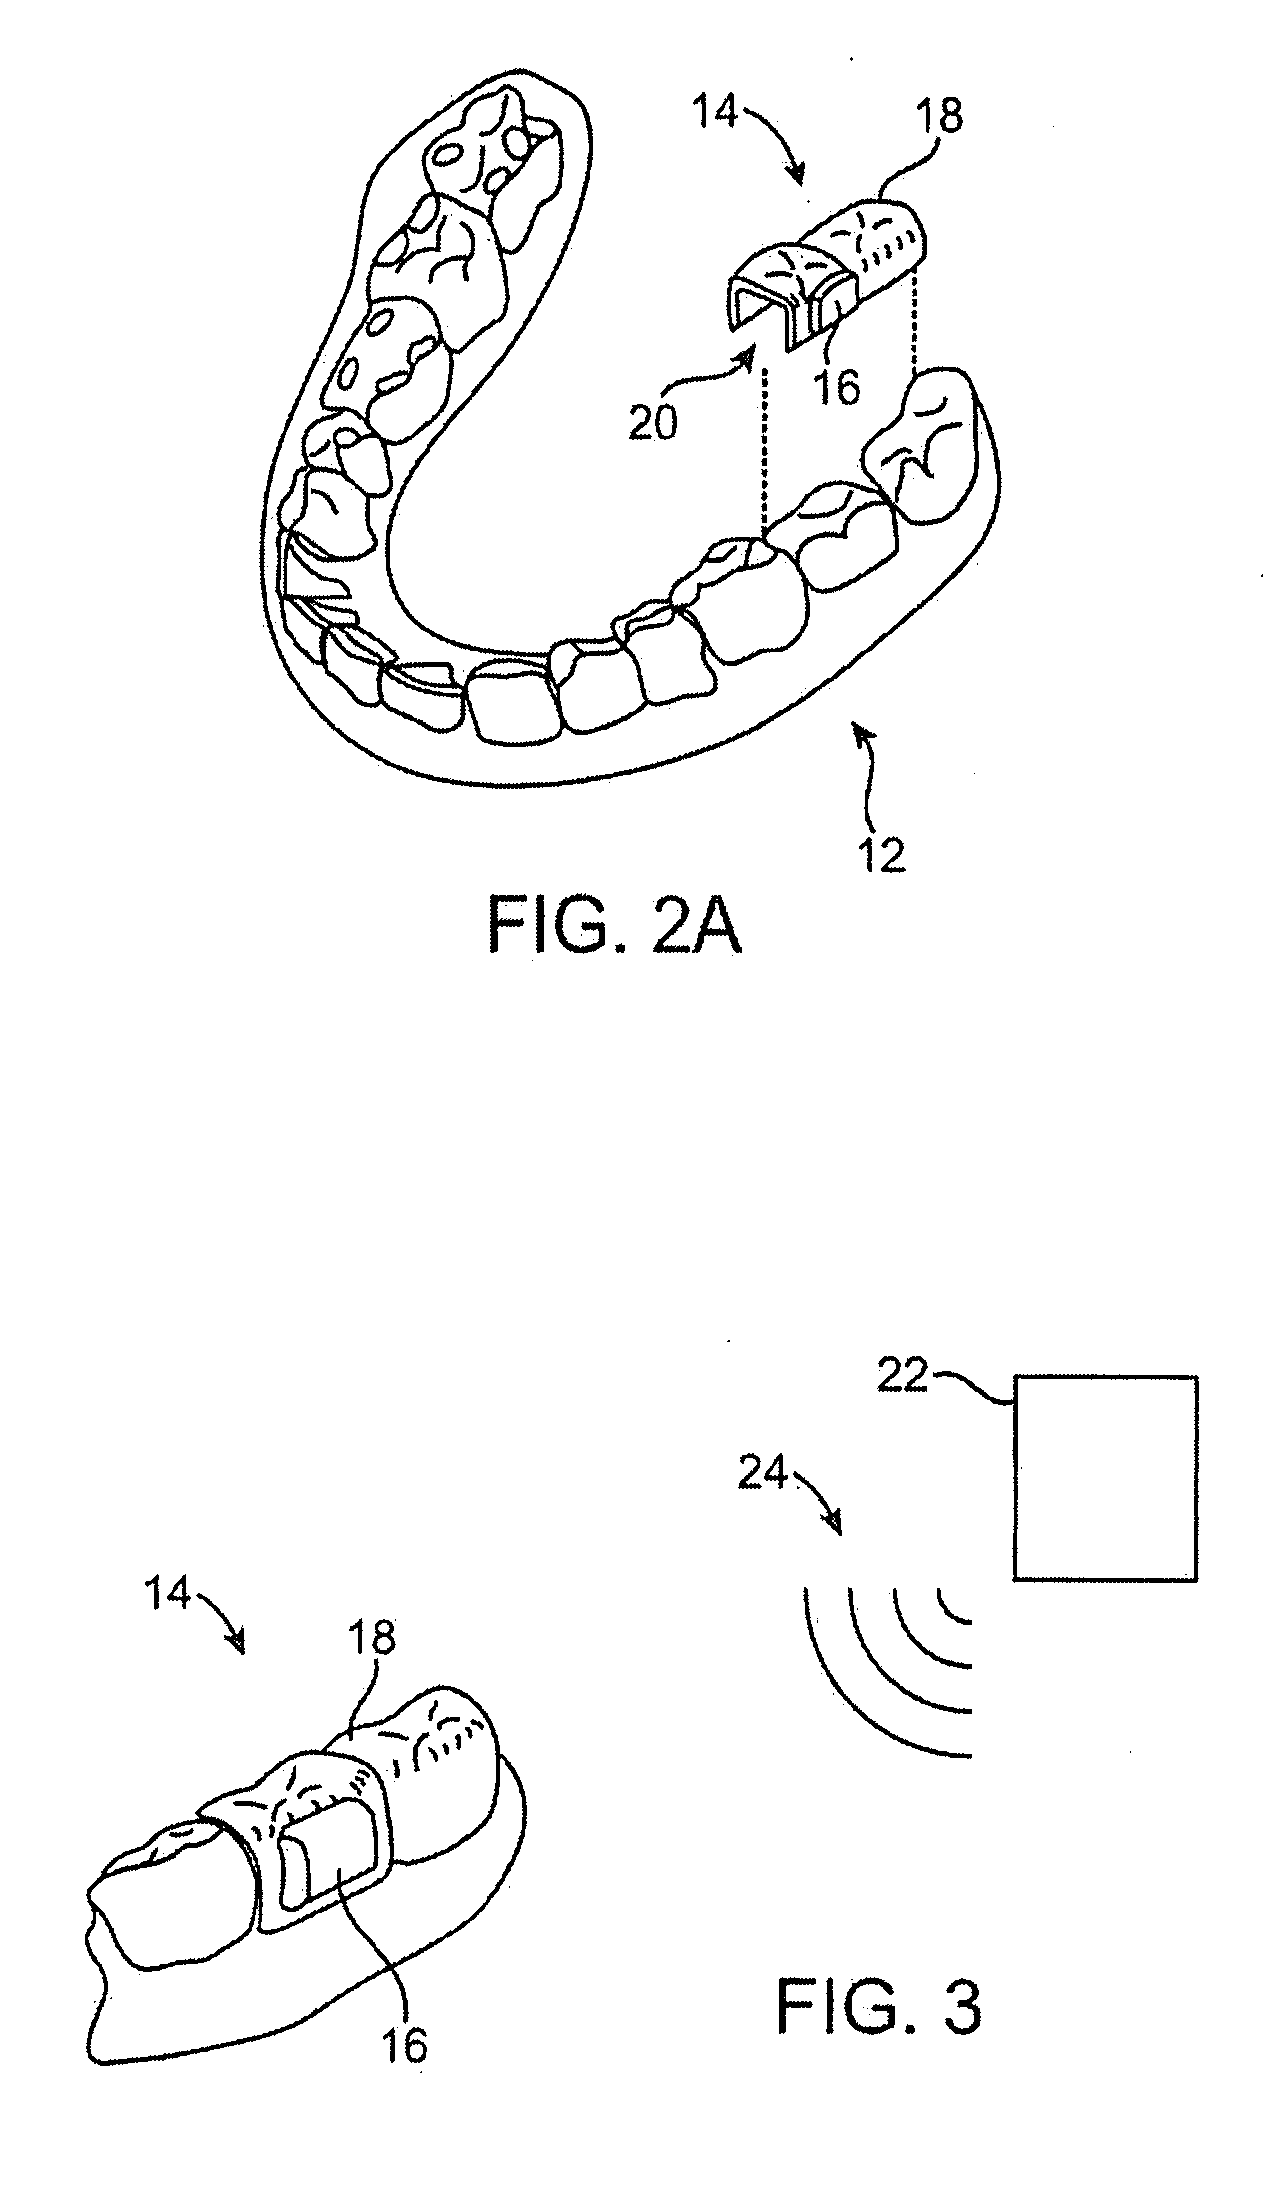 Methods and apparatus for transmitting vibrations